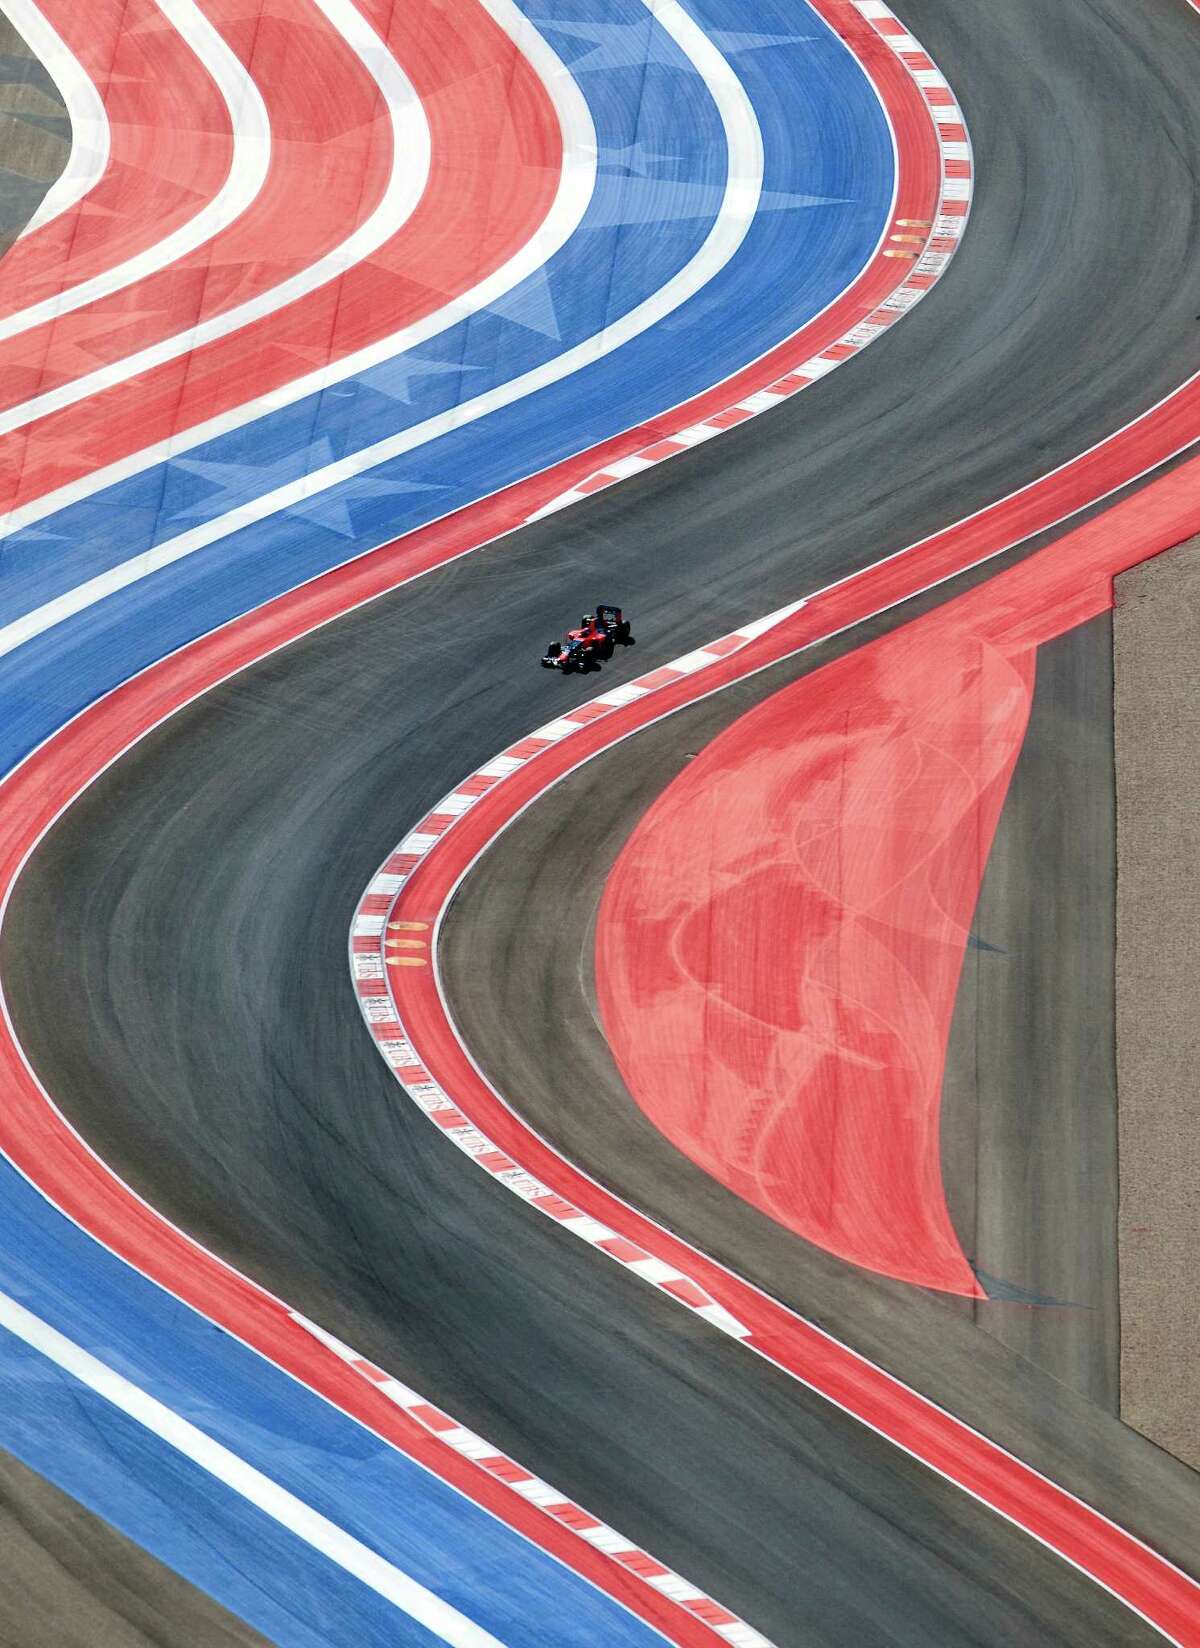 The Circuit of the Americas racetrack is seen Sunday Nov. 18, 2012 in an aerial image taken during the track's inaugural Formula 1 Grand Prix